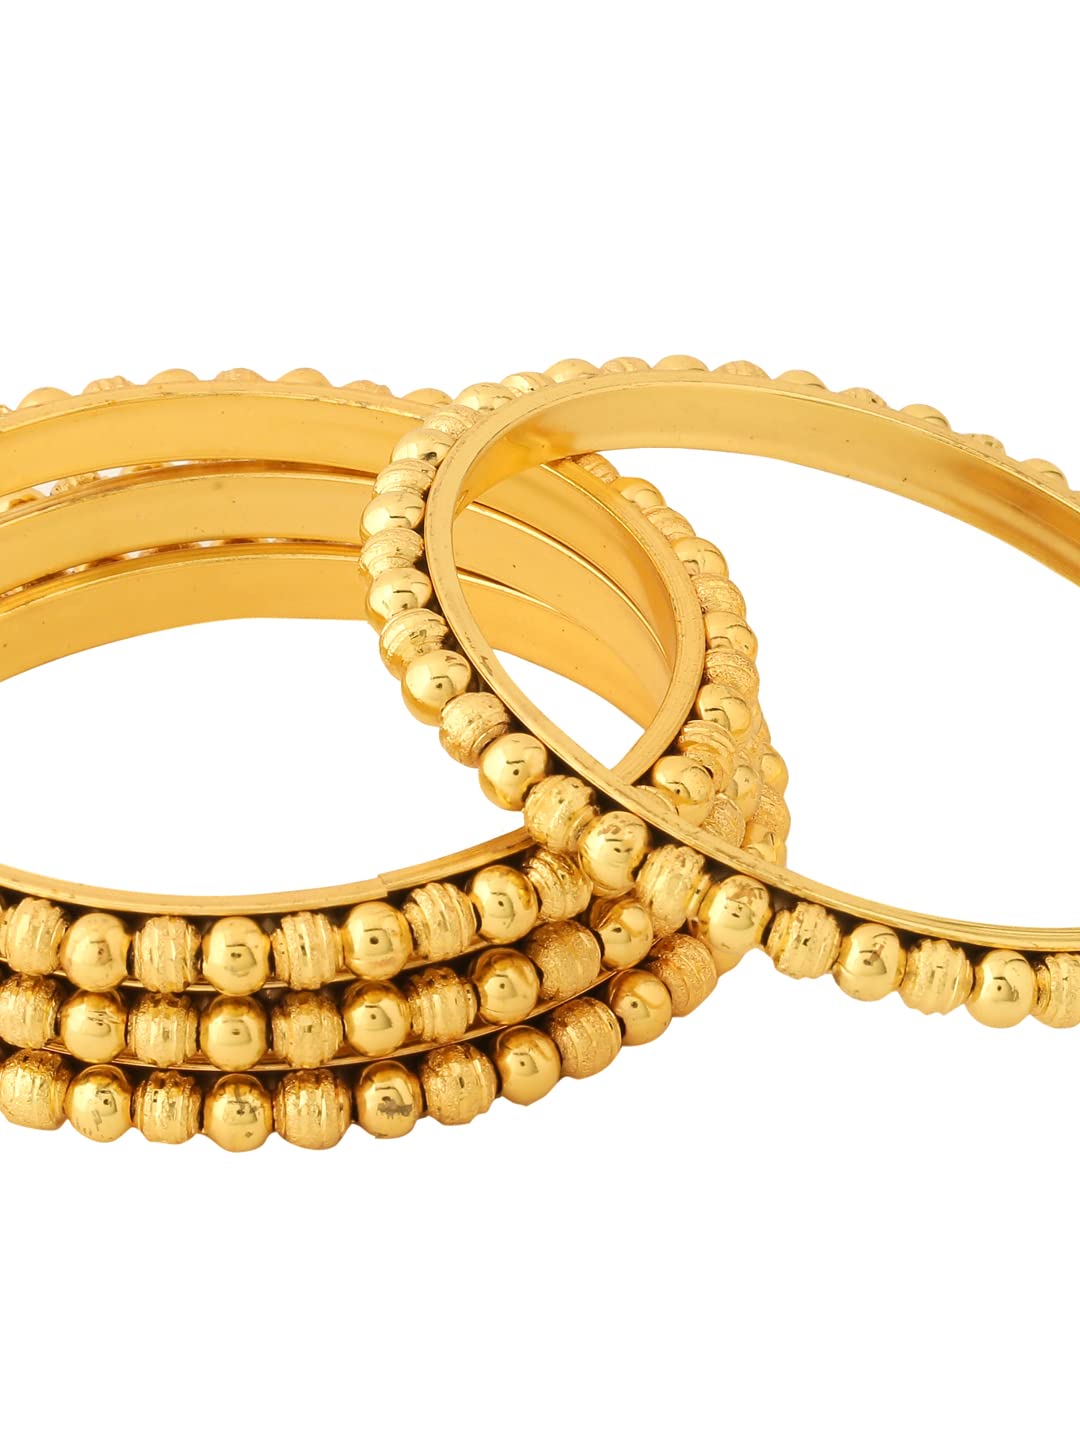 Yellow Chimes Bangles for Women Gold Toned Beads Designed Set of 4 Pcs Traditional Bangles for Women and Girls